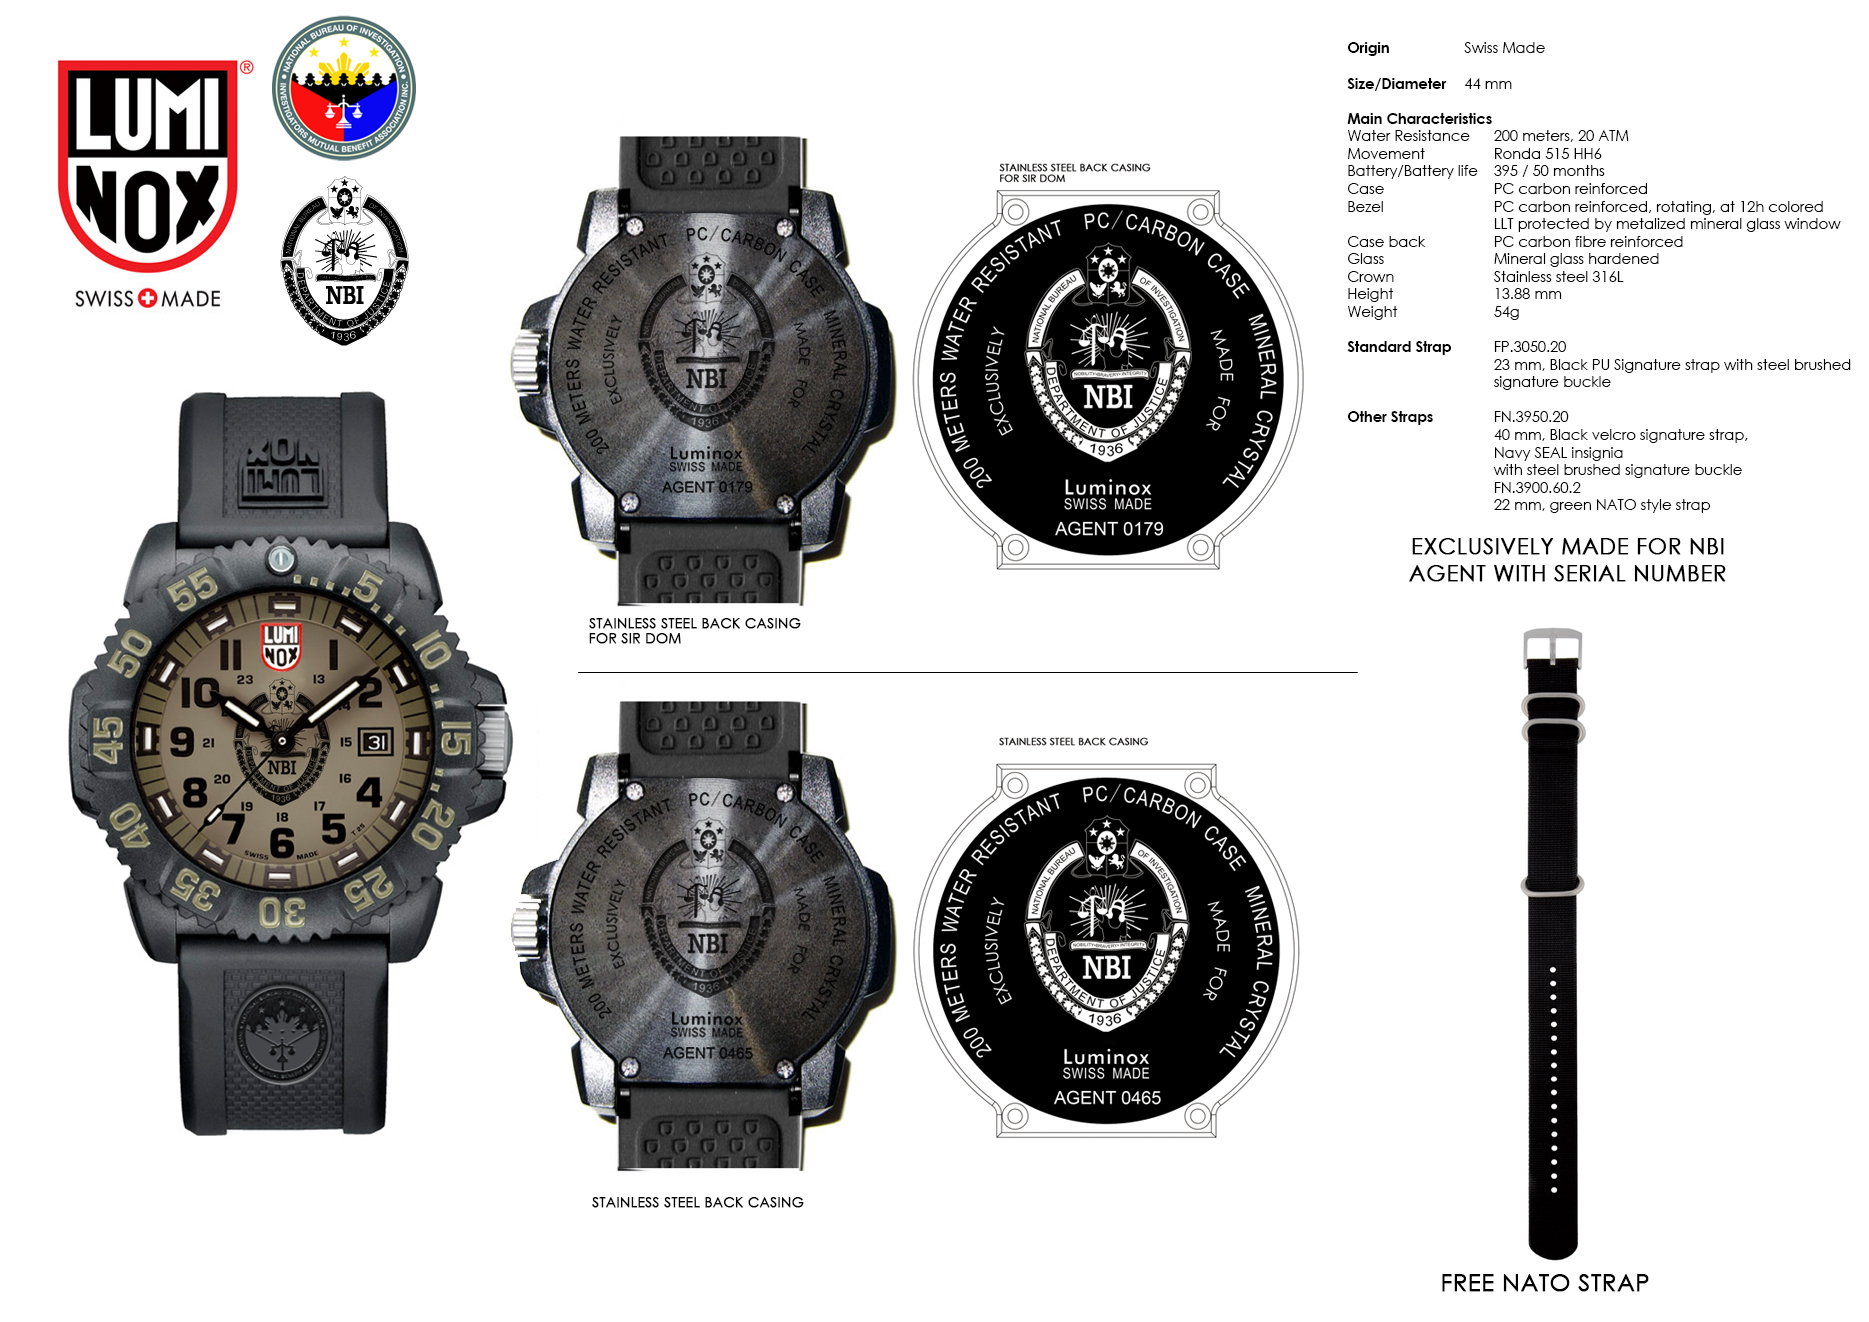 Limited edition NBI wristwatch by Luminox exclusively at Multiply.com